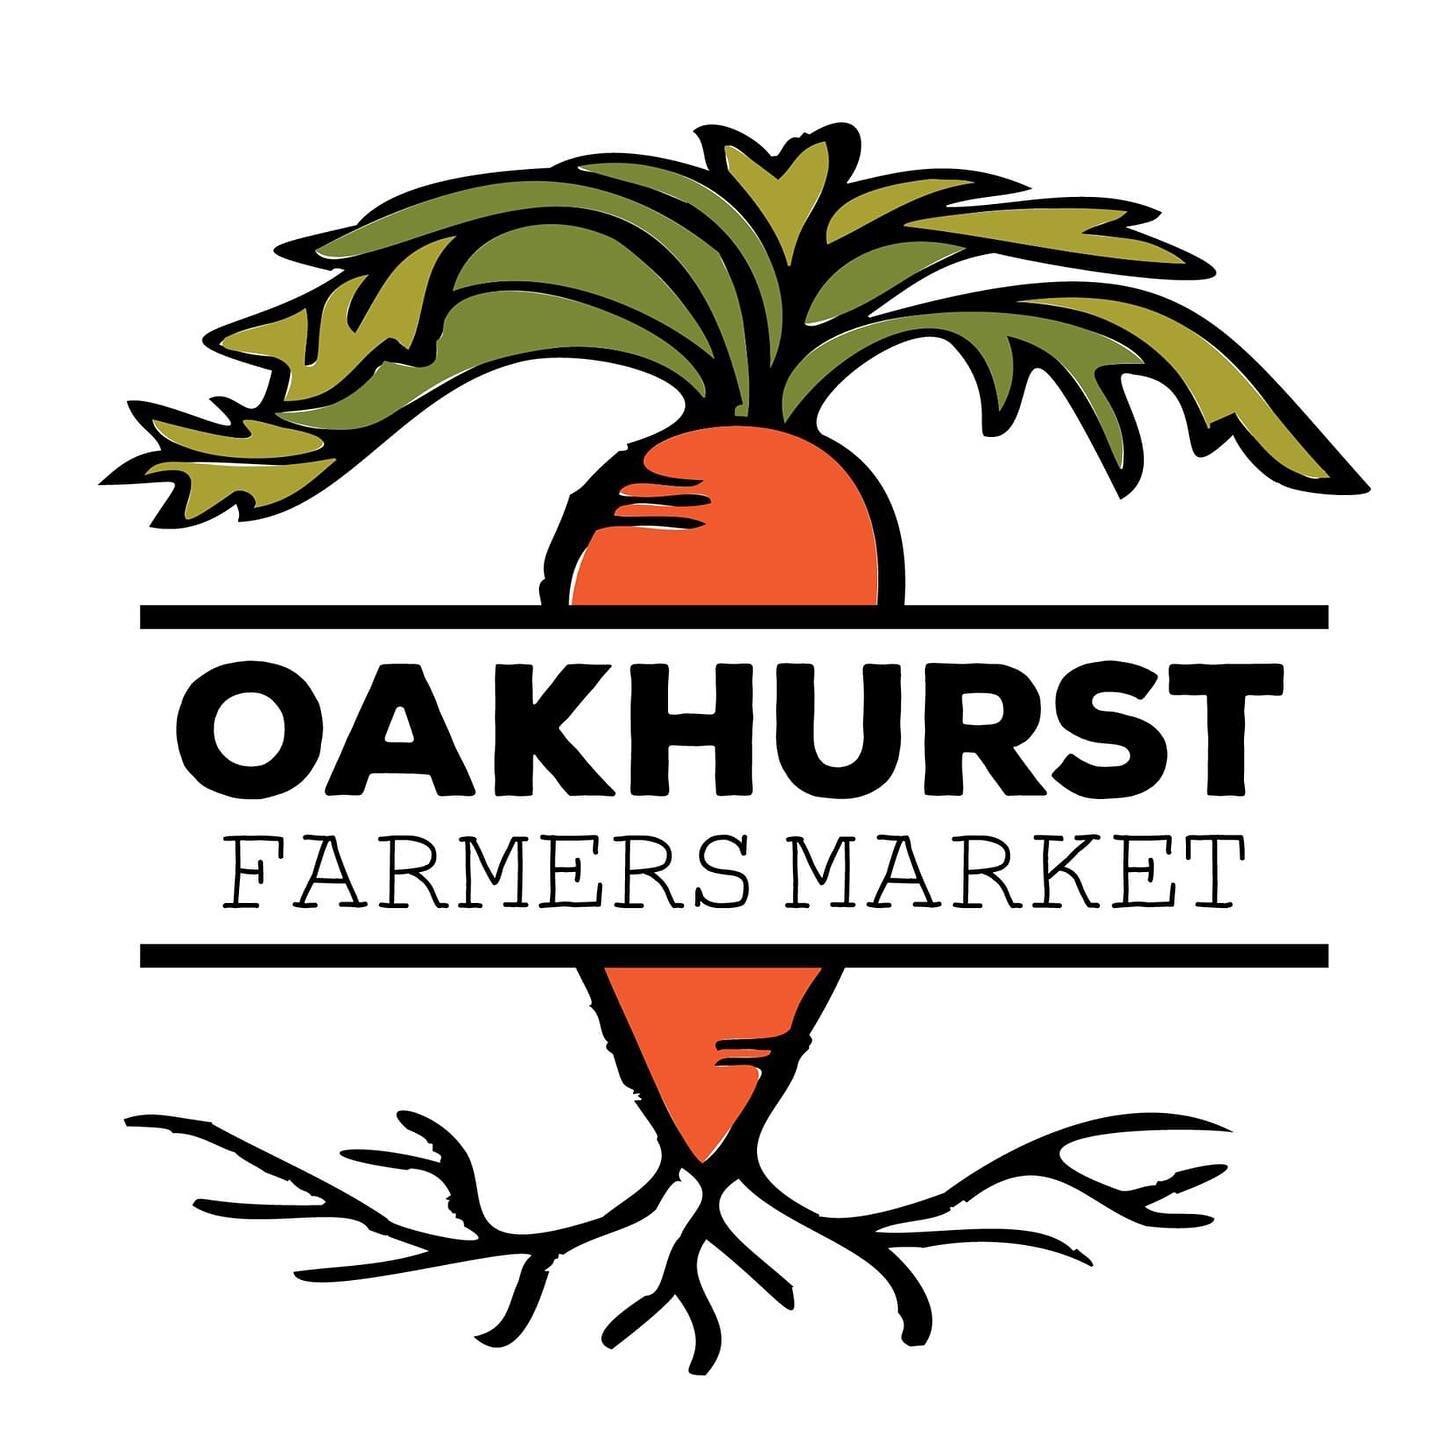 Big day tomorrow! We&rsquo;ll be back in Oakhurst in front of Sceptre Brewing from dawn till dusk! Market goes from 9 - 1 and brewery opens at noon till late! Come say hello and bring any gear you&rsquo;d like to consign! Quality daypacks, camp stove